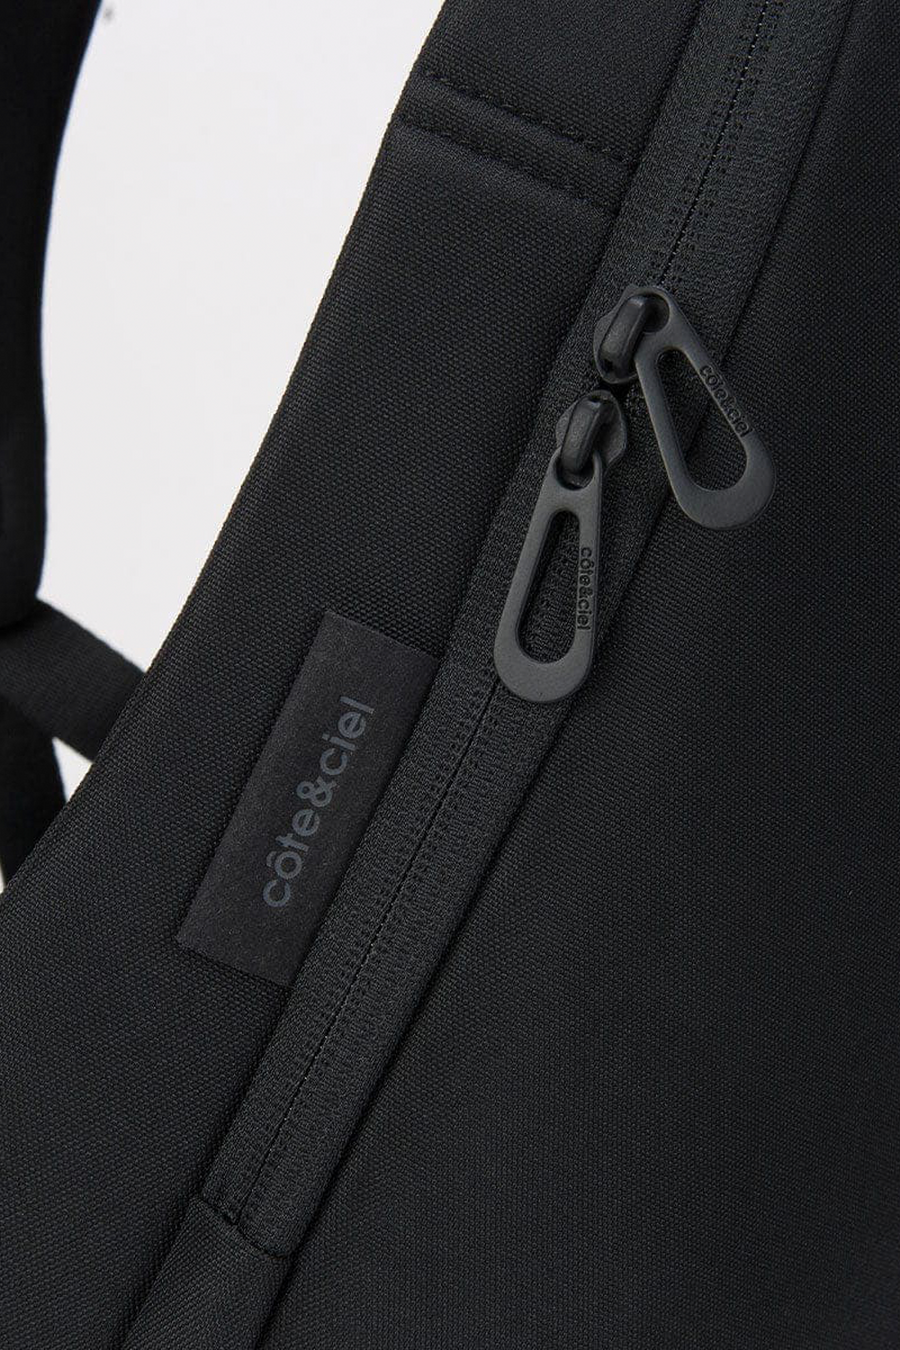 Buy the Cote & Ciel Isar Backpack Small EcoYarn in Black at Intro. Spend £50 for free UK delivery. Official stockists. We ship worldwide.